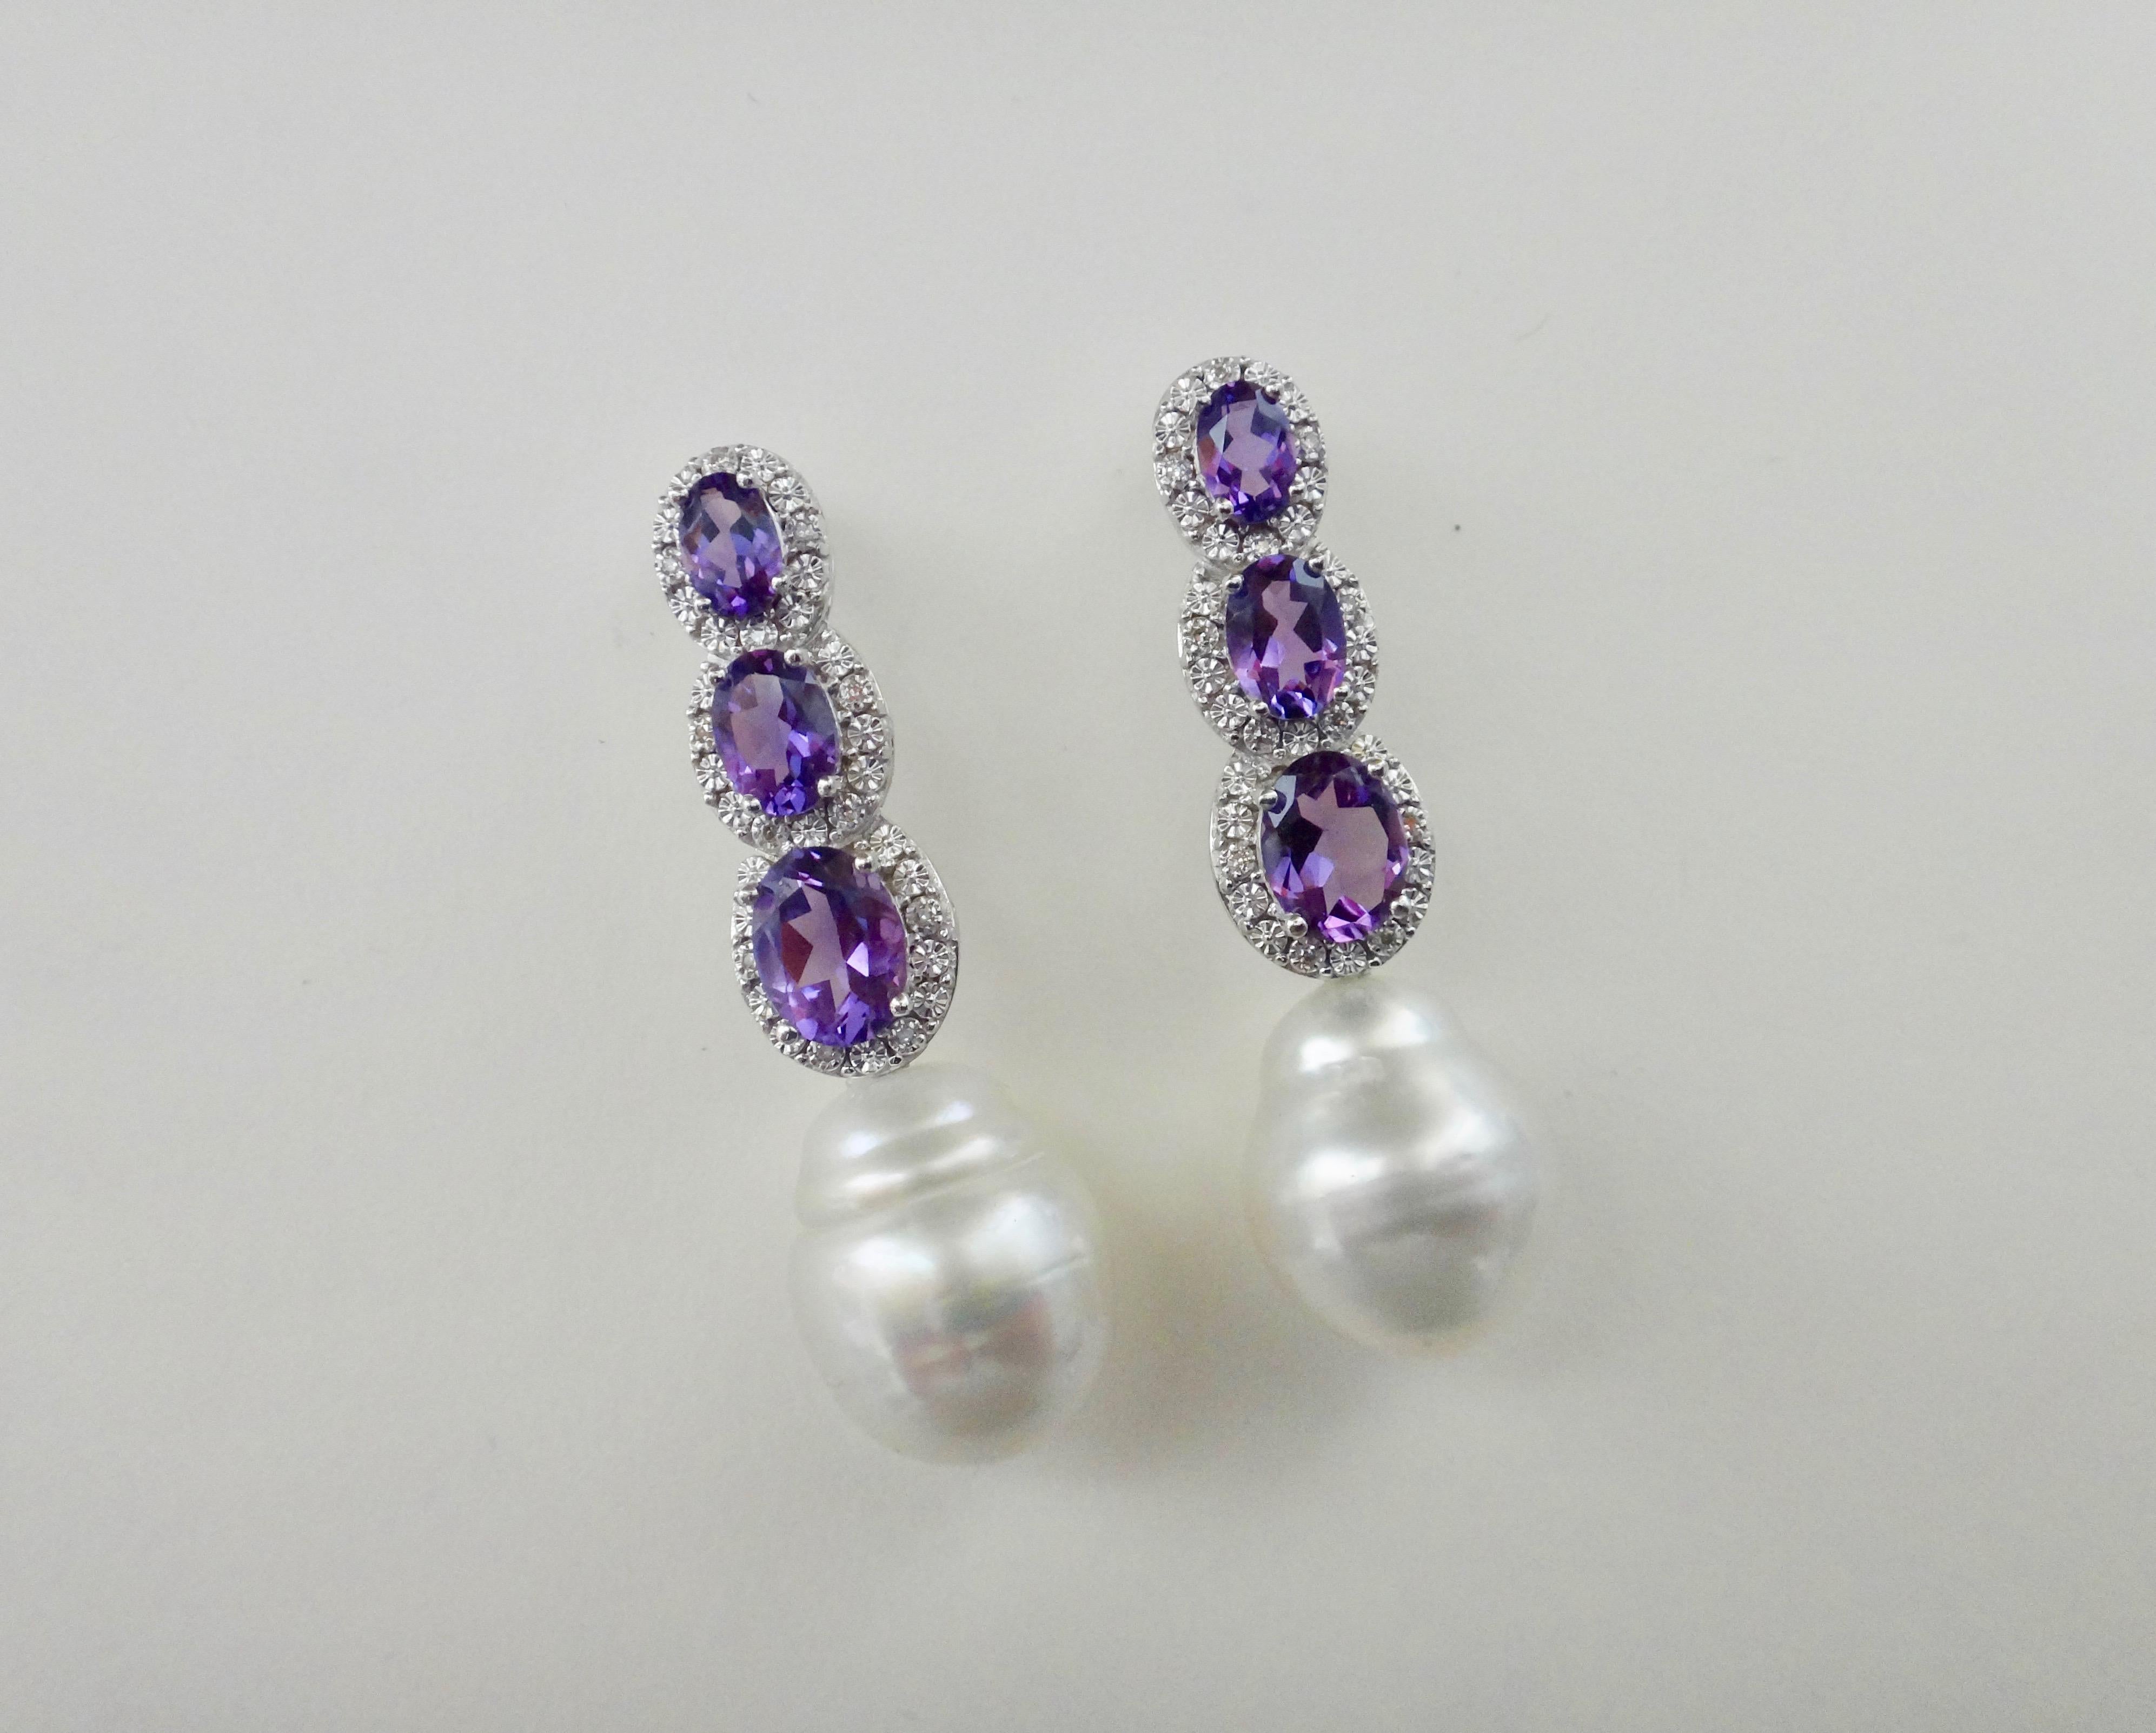 Amethyst in oval shapes and graduated in size are surrounded with micro-pave white diamonds in these white gold dangle earrings.  The drops are finished with baroque, gem quality Paspaley South Seas pearls.  The earrings come with posts and extra